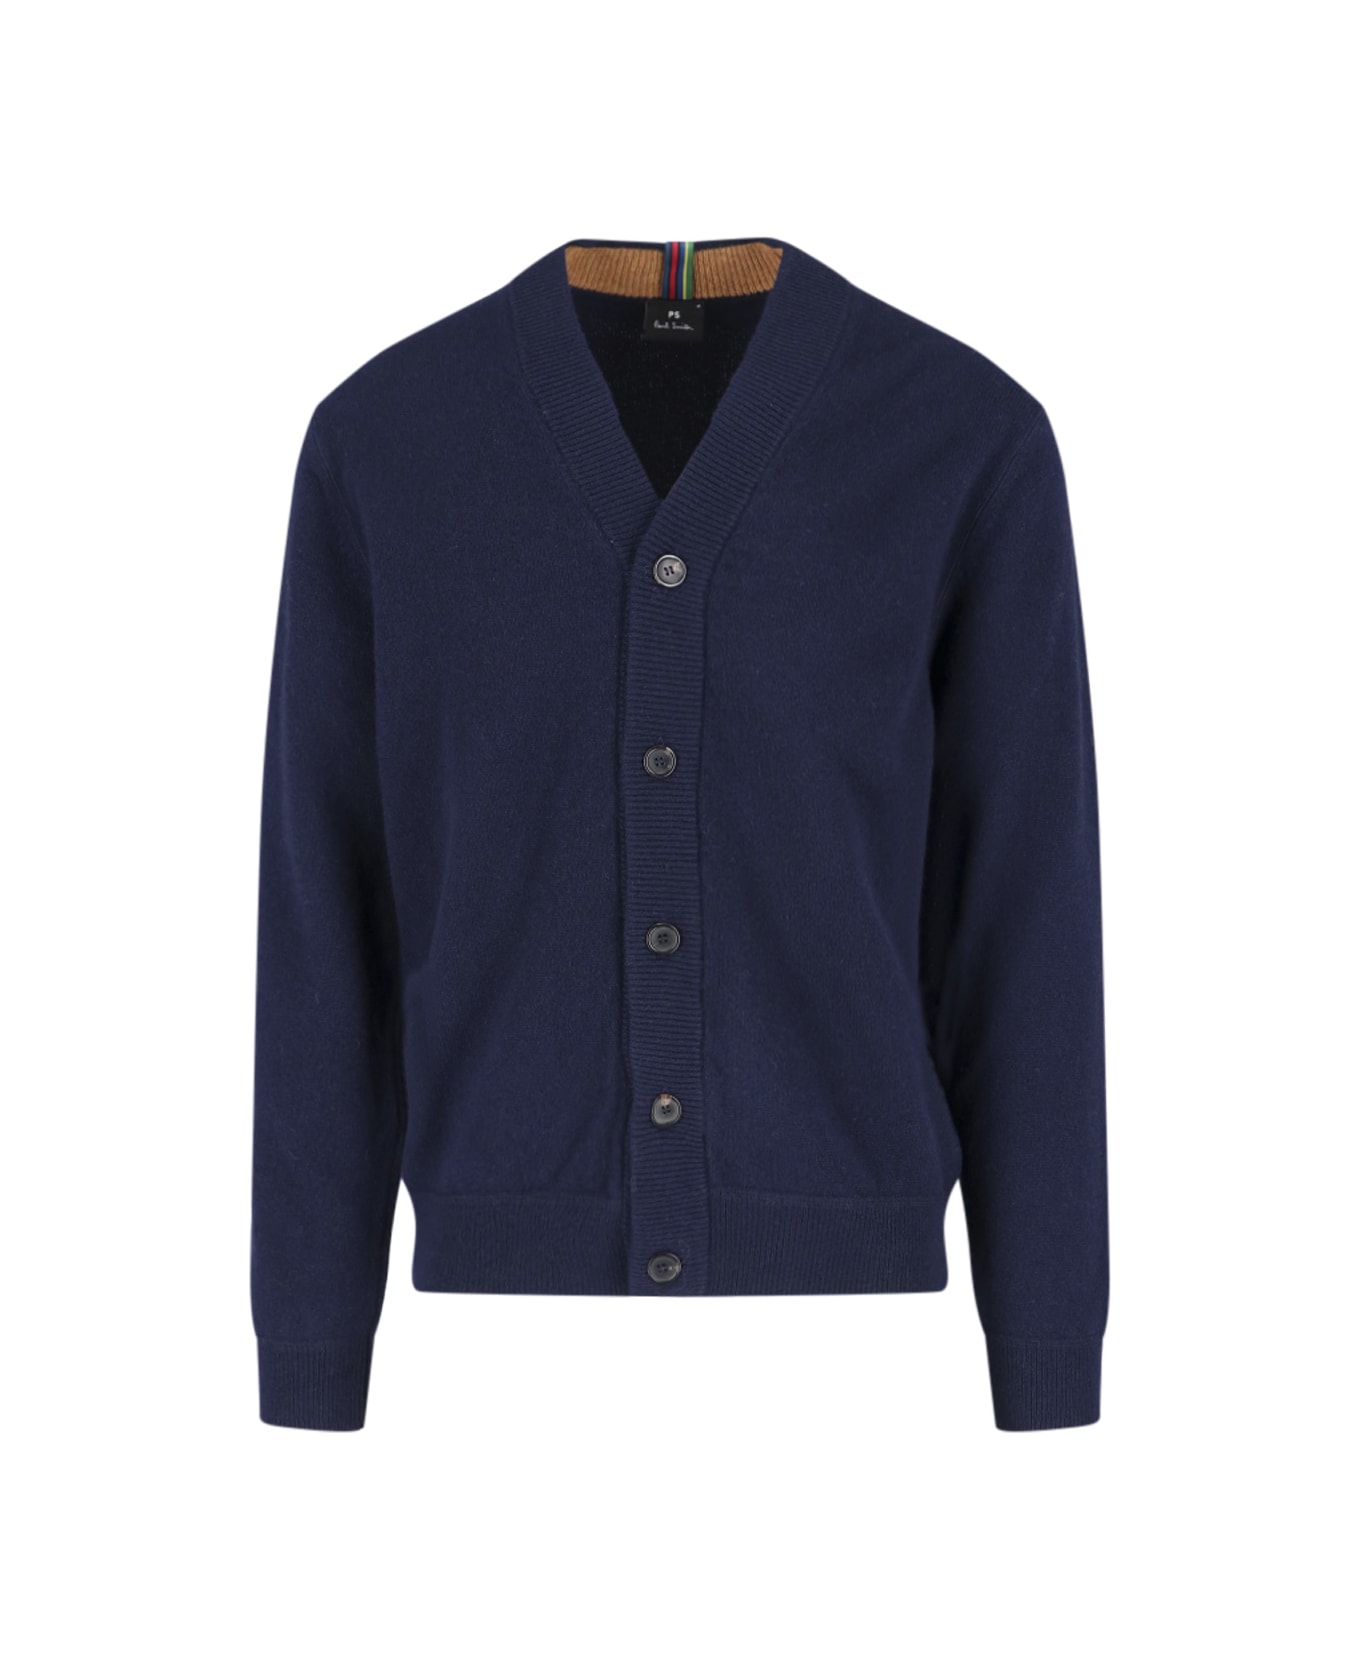 PS by Paul Smith V-neck Cardigan - Blue